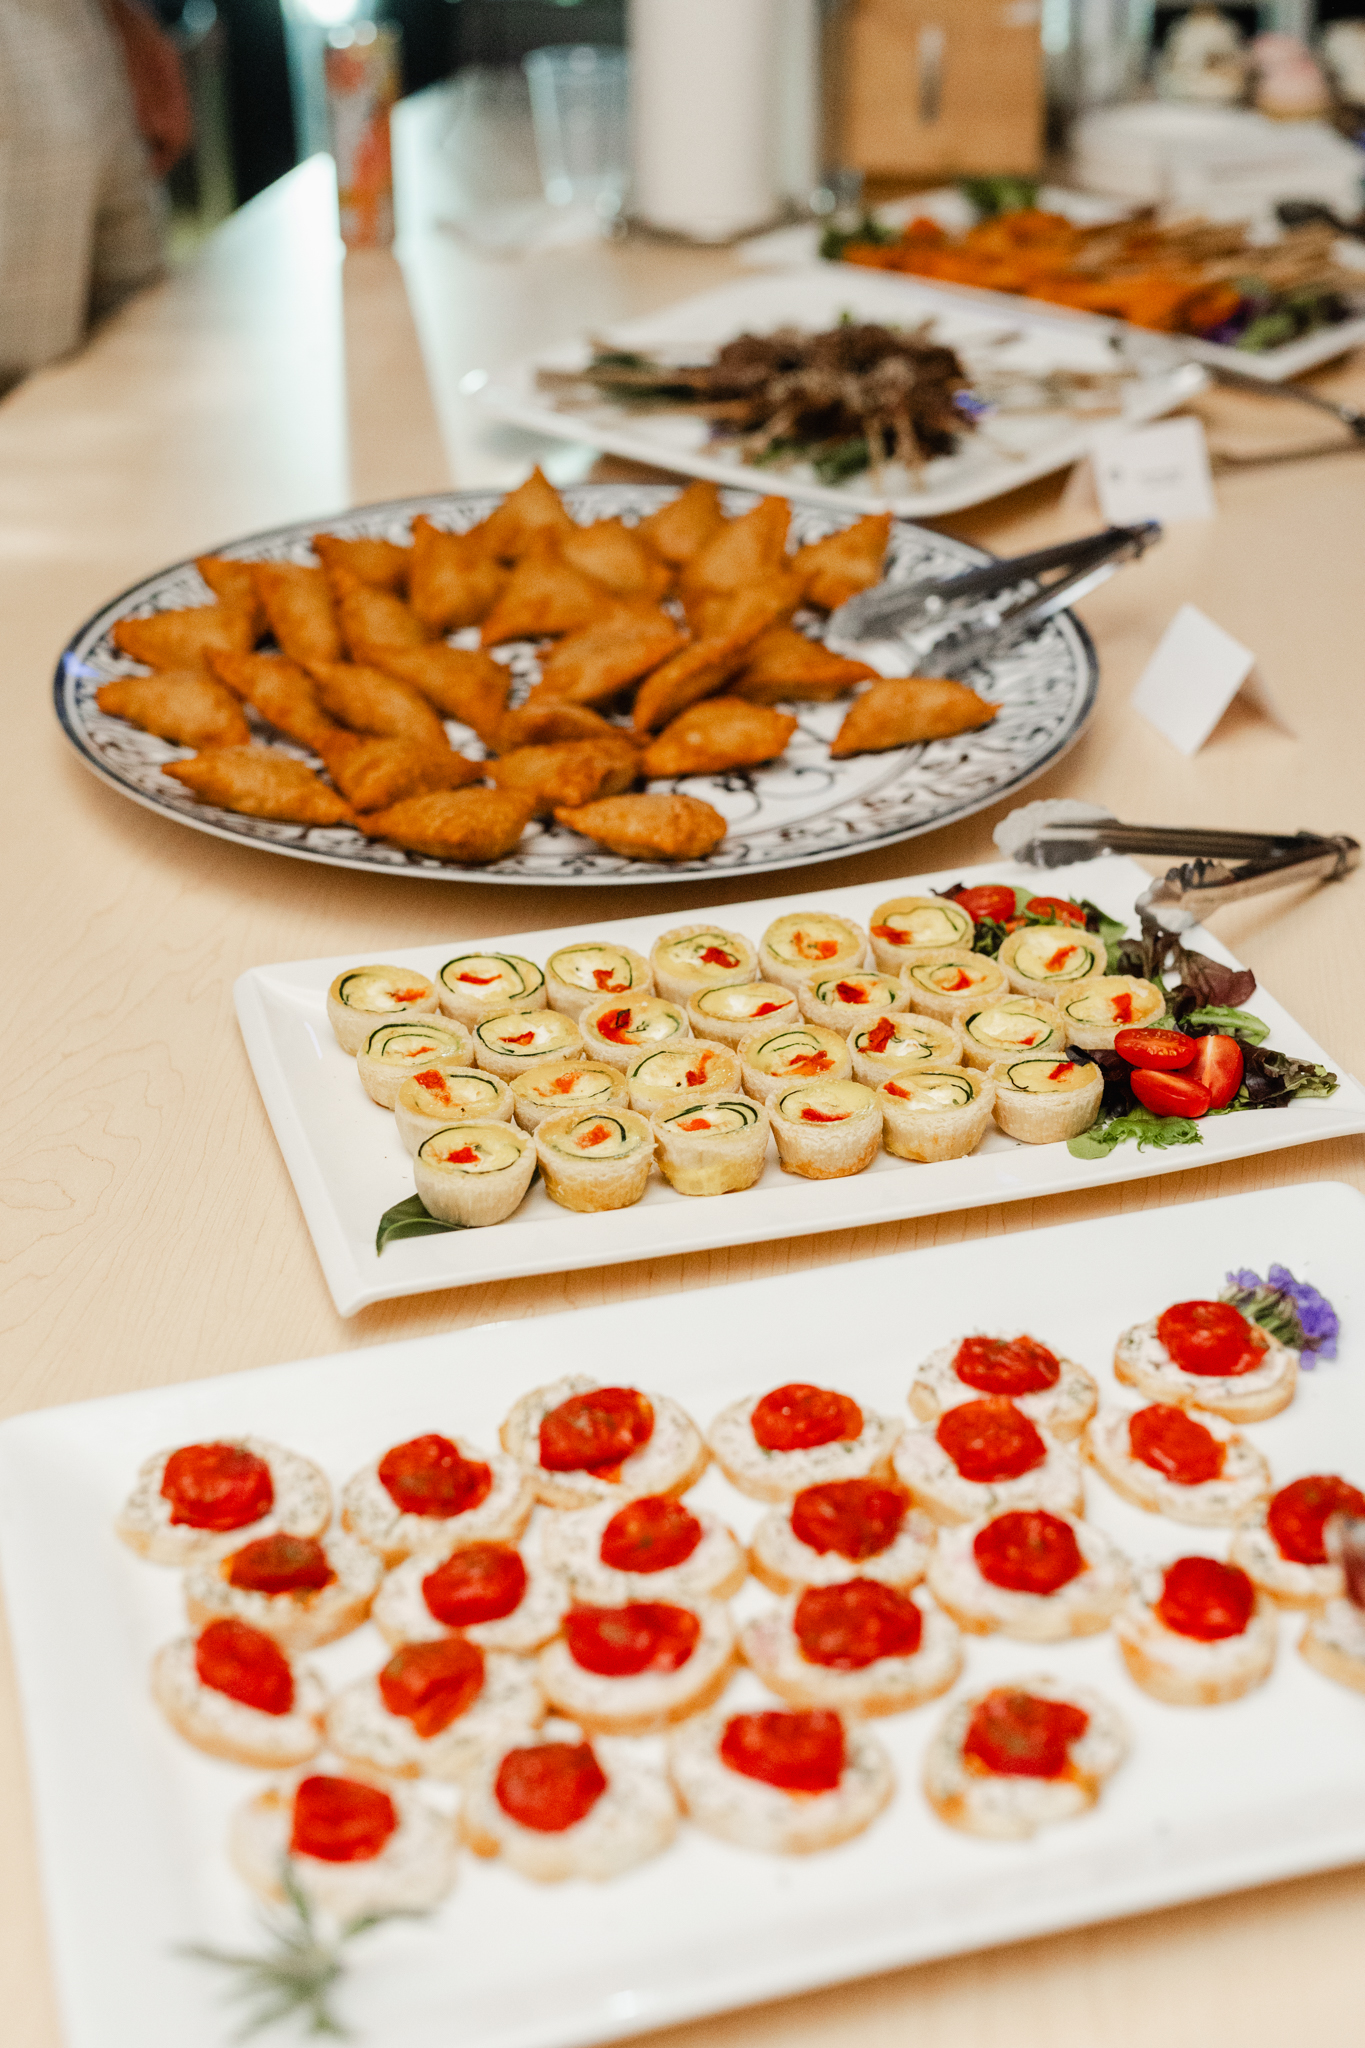 Event photography: Trays of appetizers on a table.